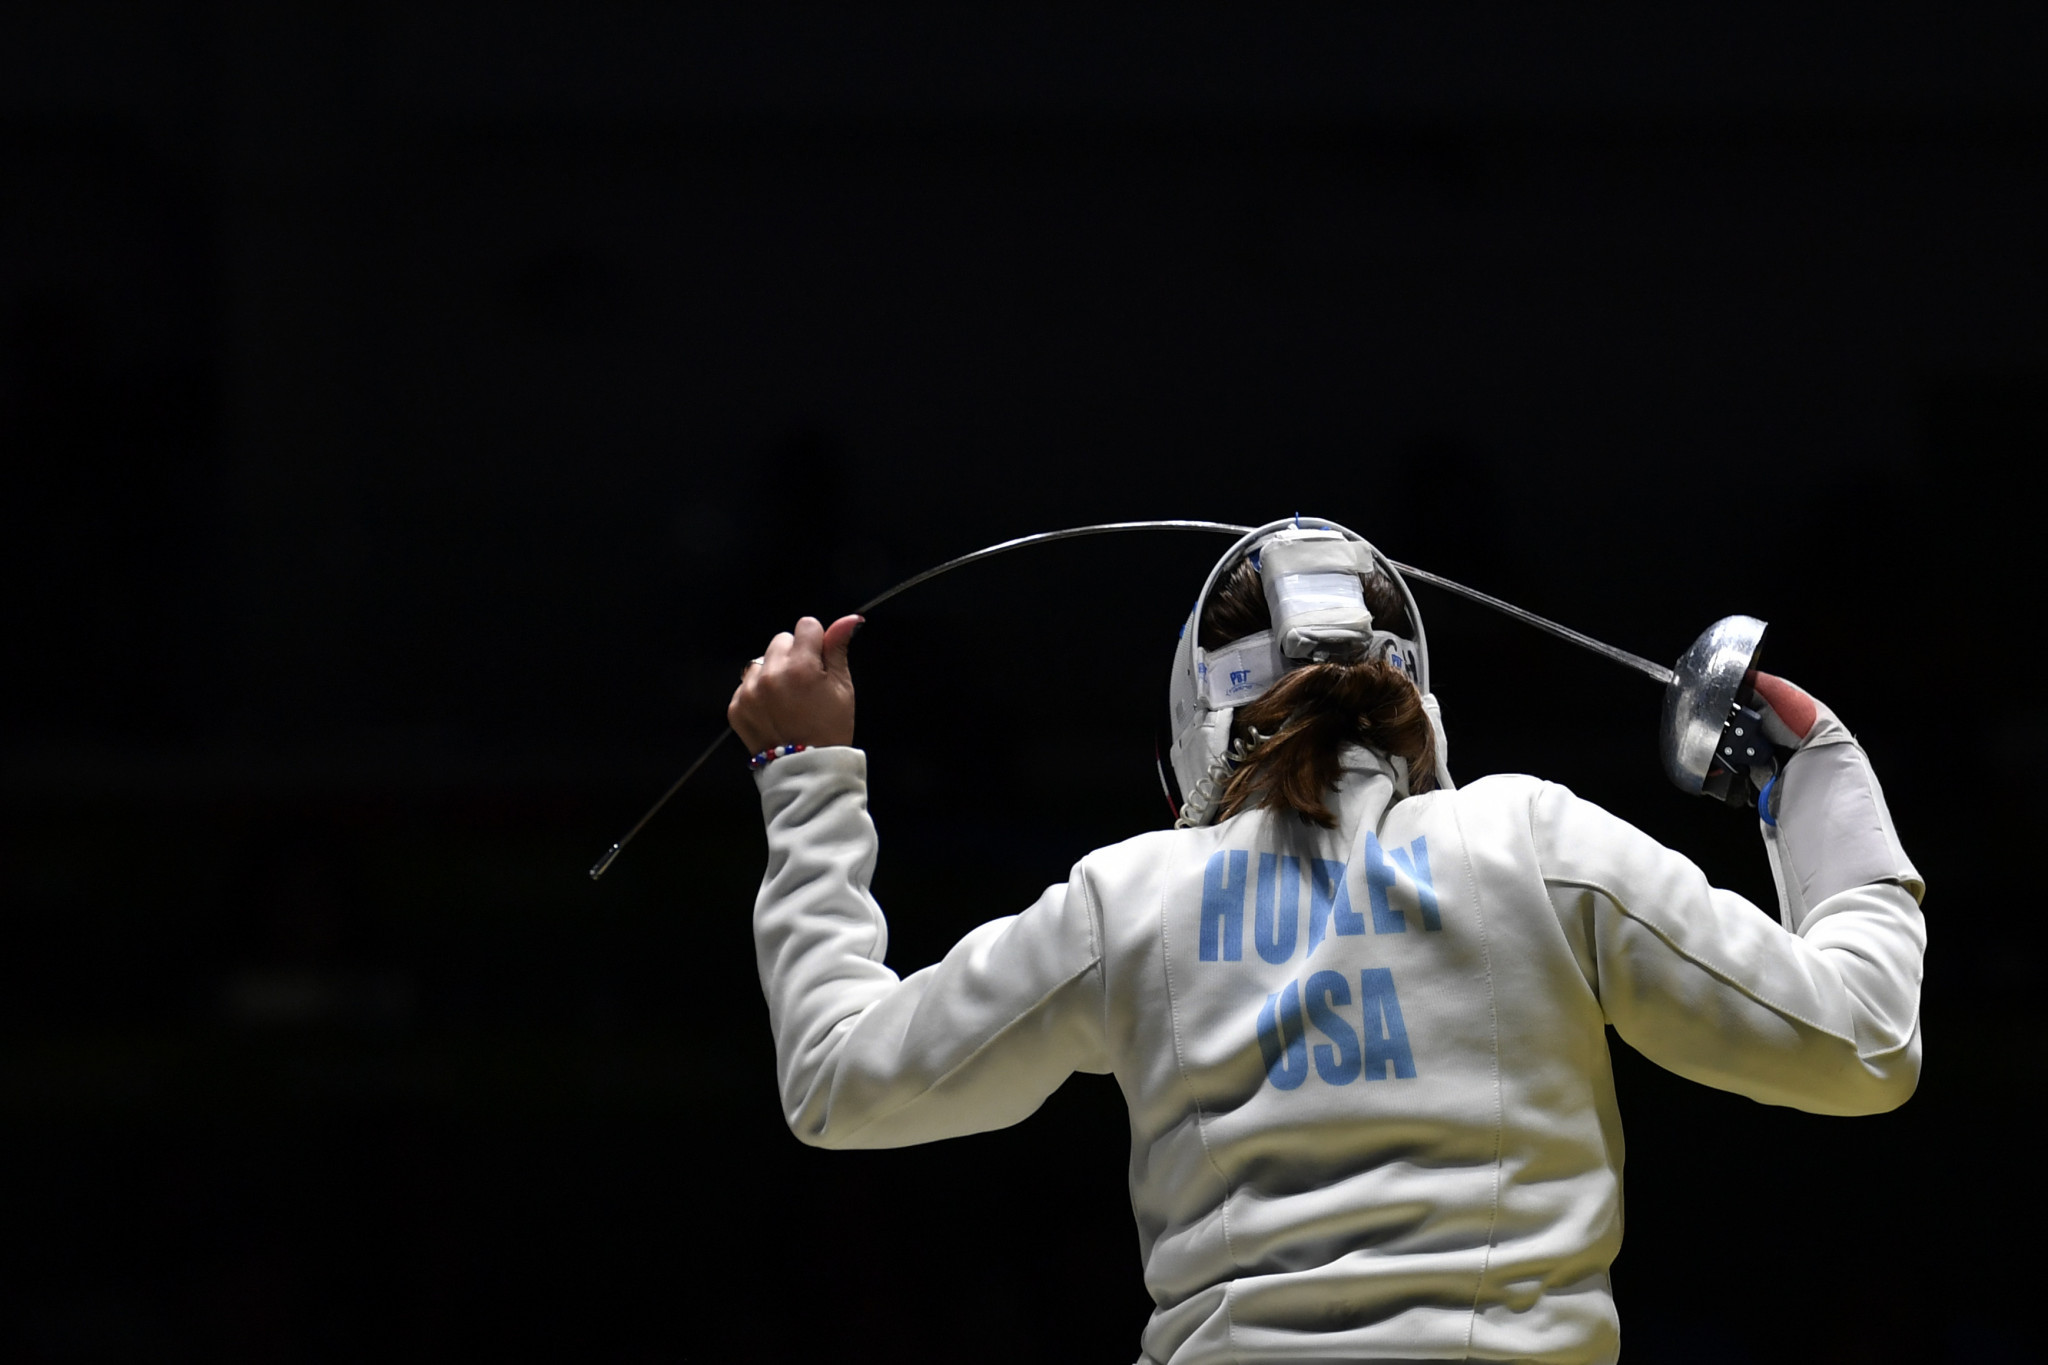 Hurley and Imboden defend titles at Pan American Fencing Championships